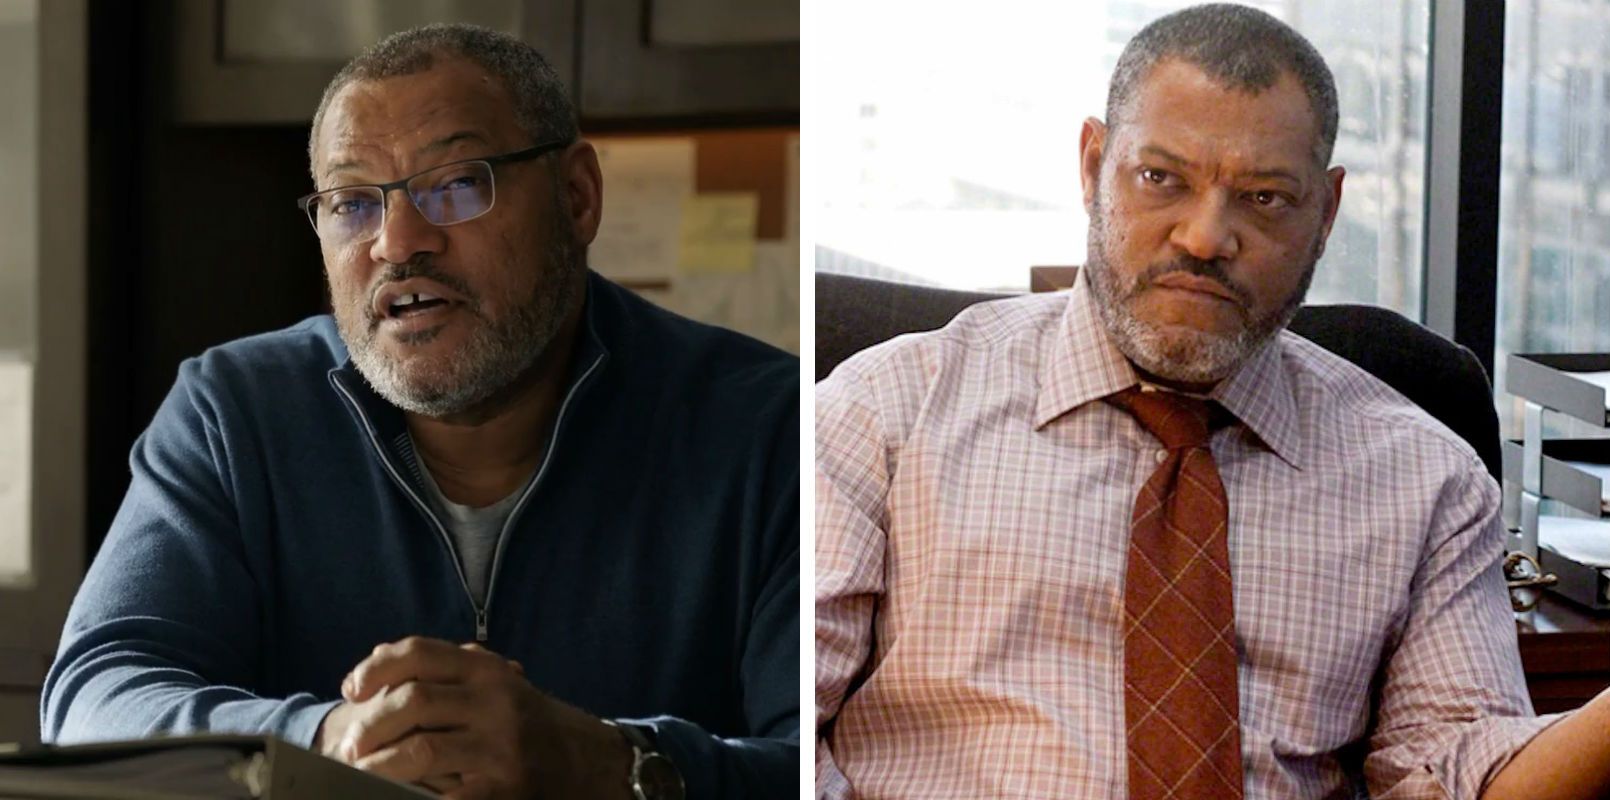 Laurence Fishburne in Ant Man and the Wasp and Batman v Superman